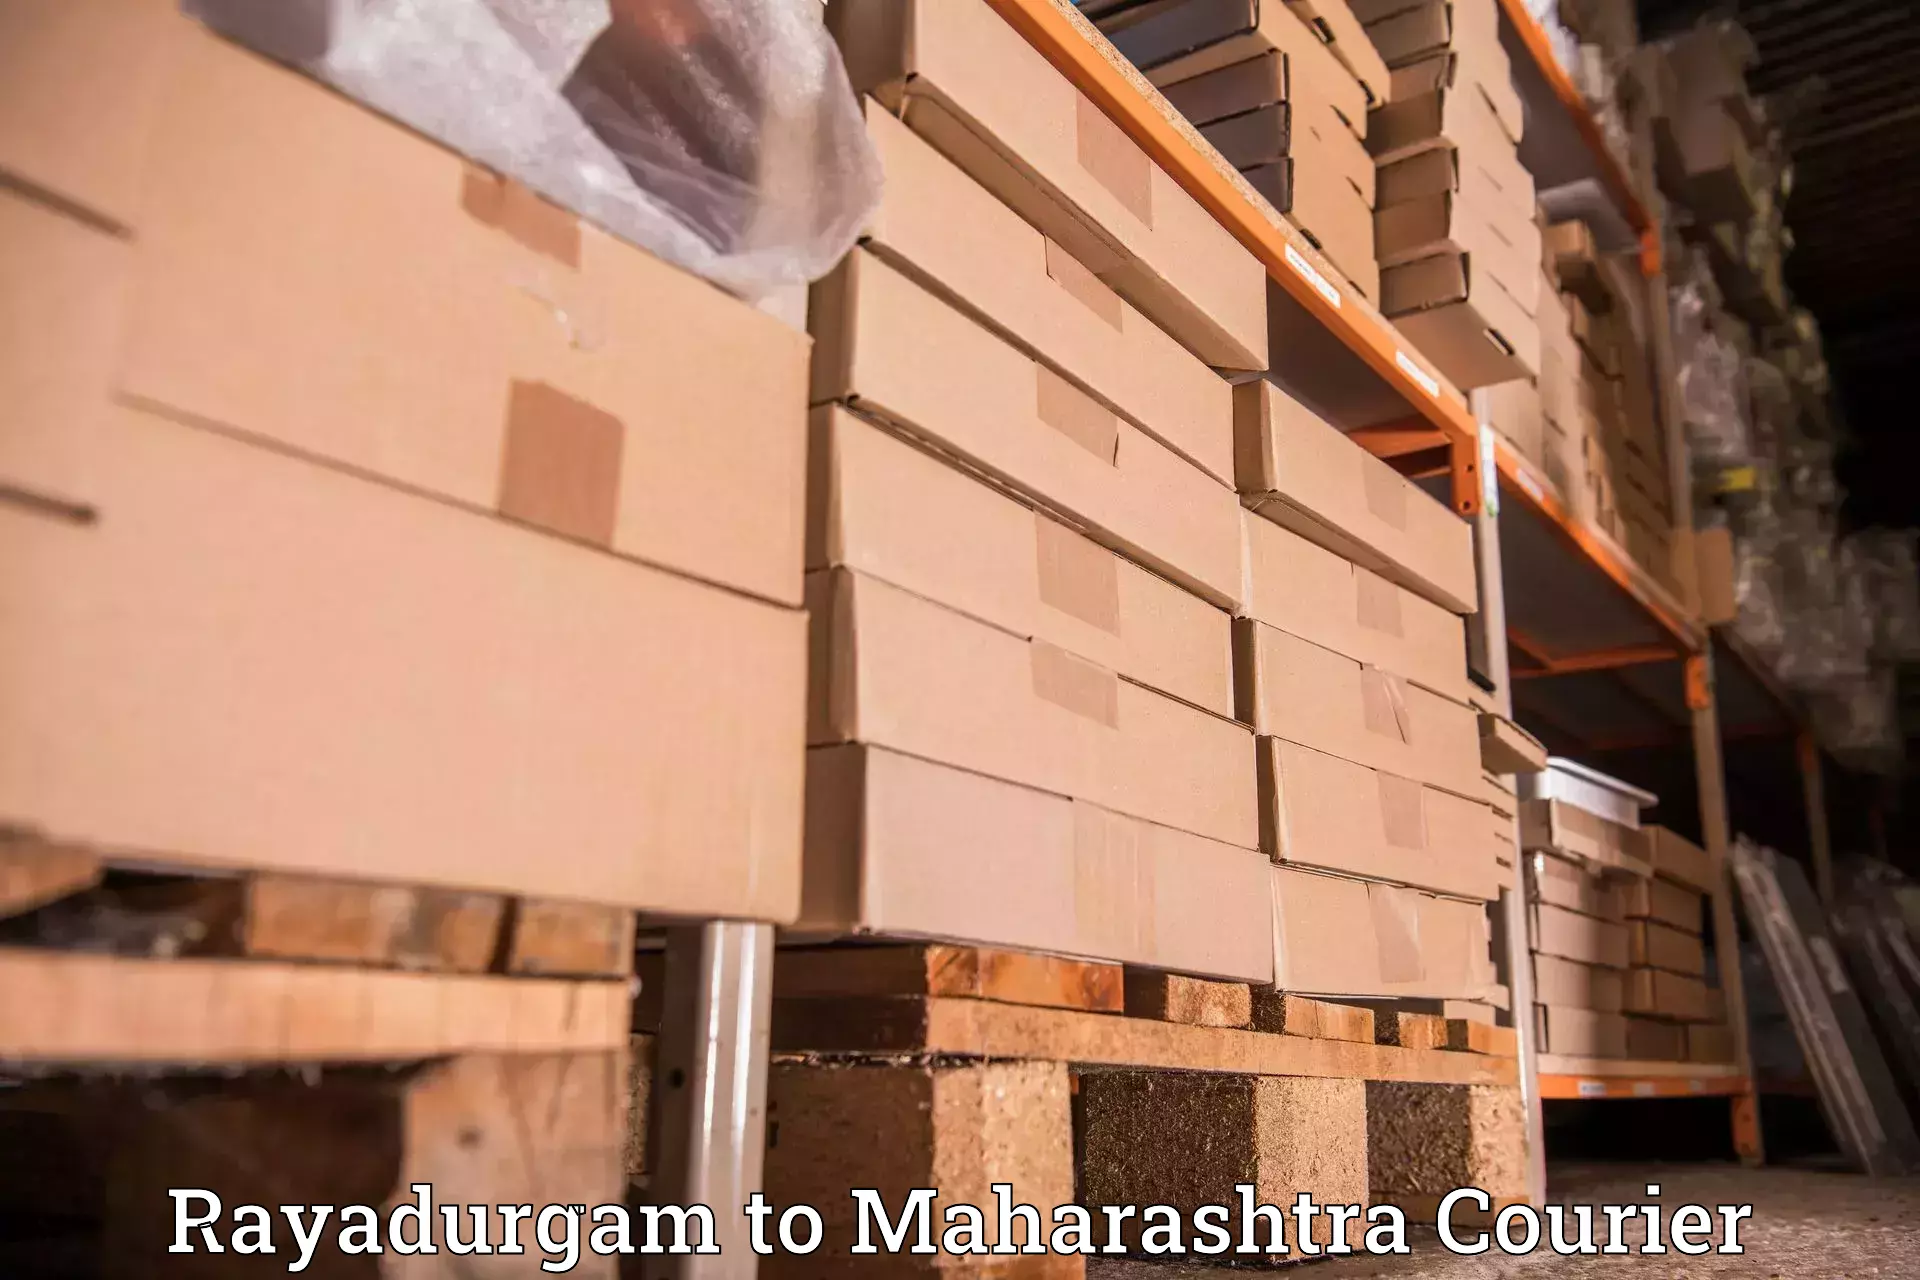 Flexible delivery schedules Rayadurgam to Mumbai Port